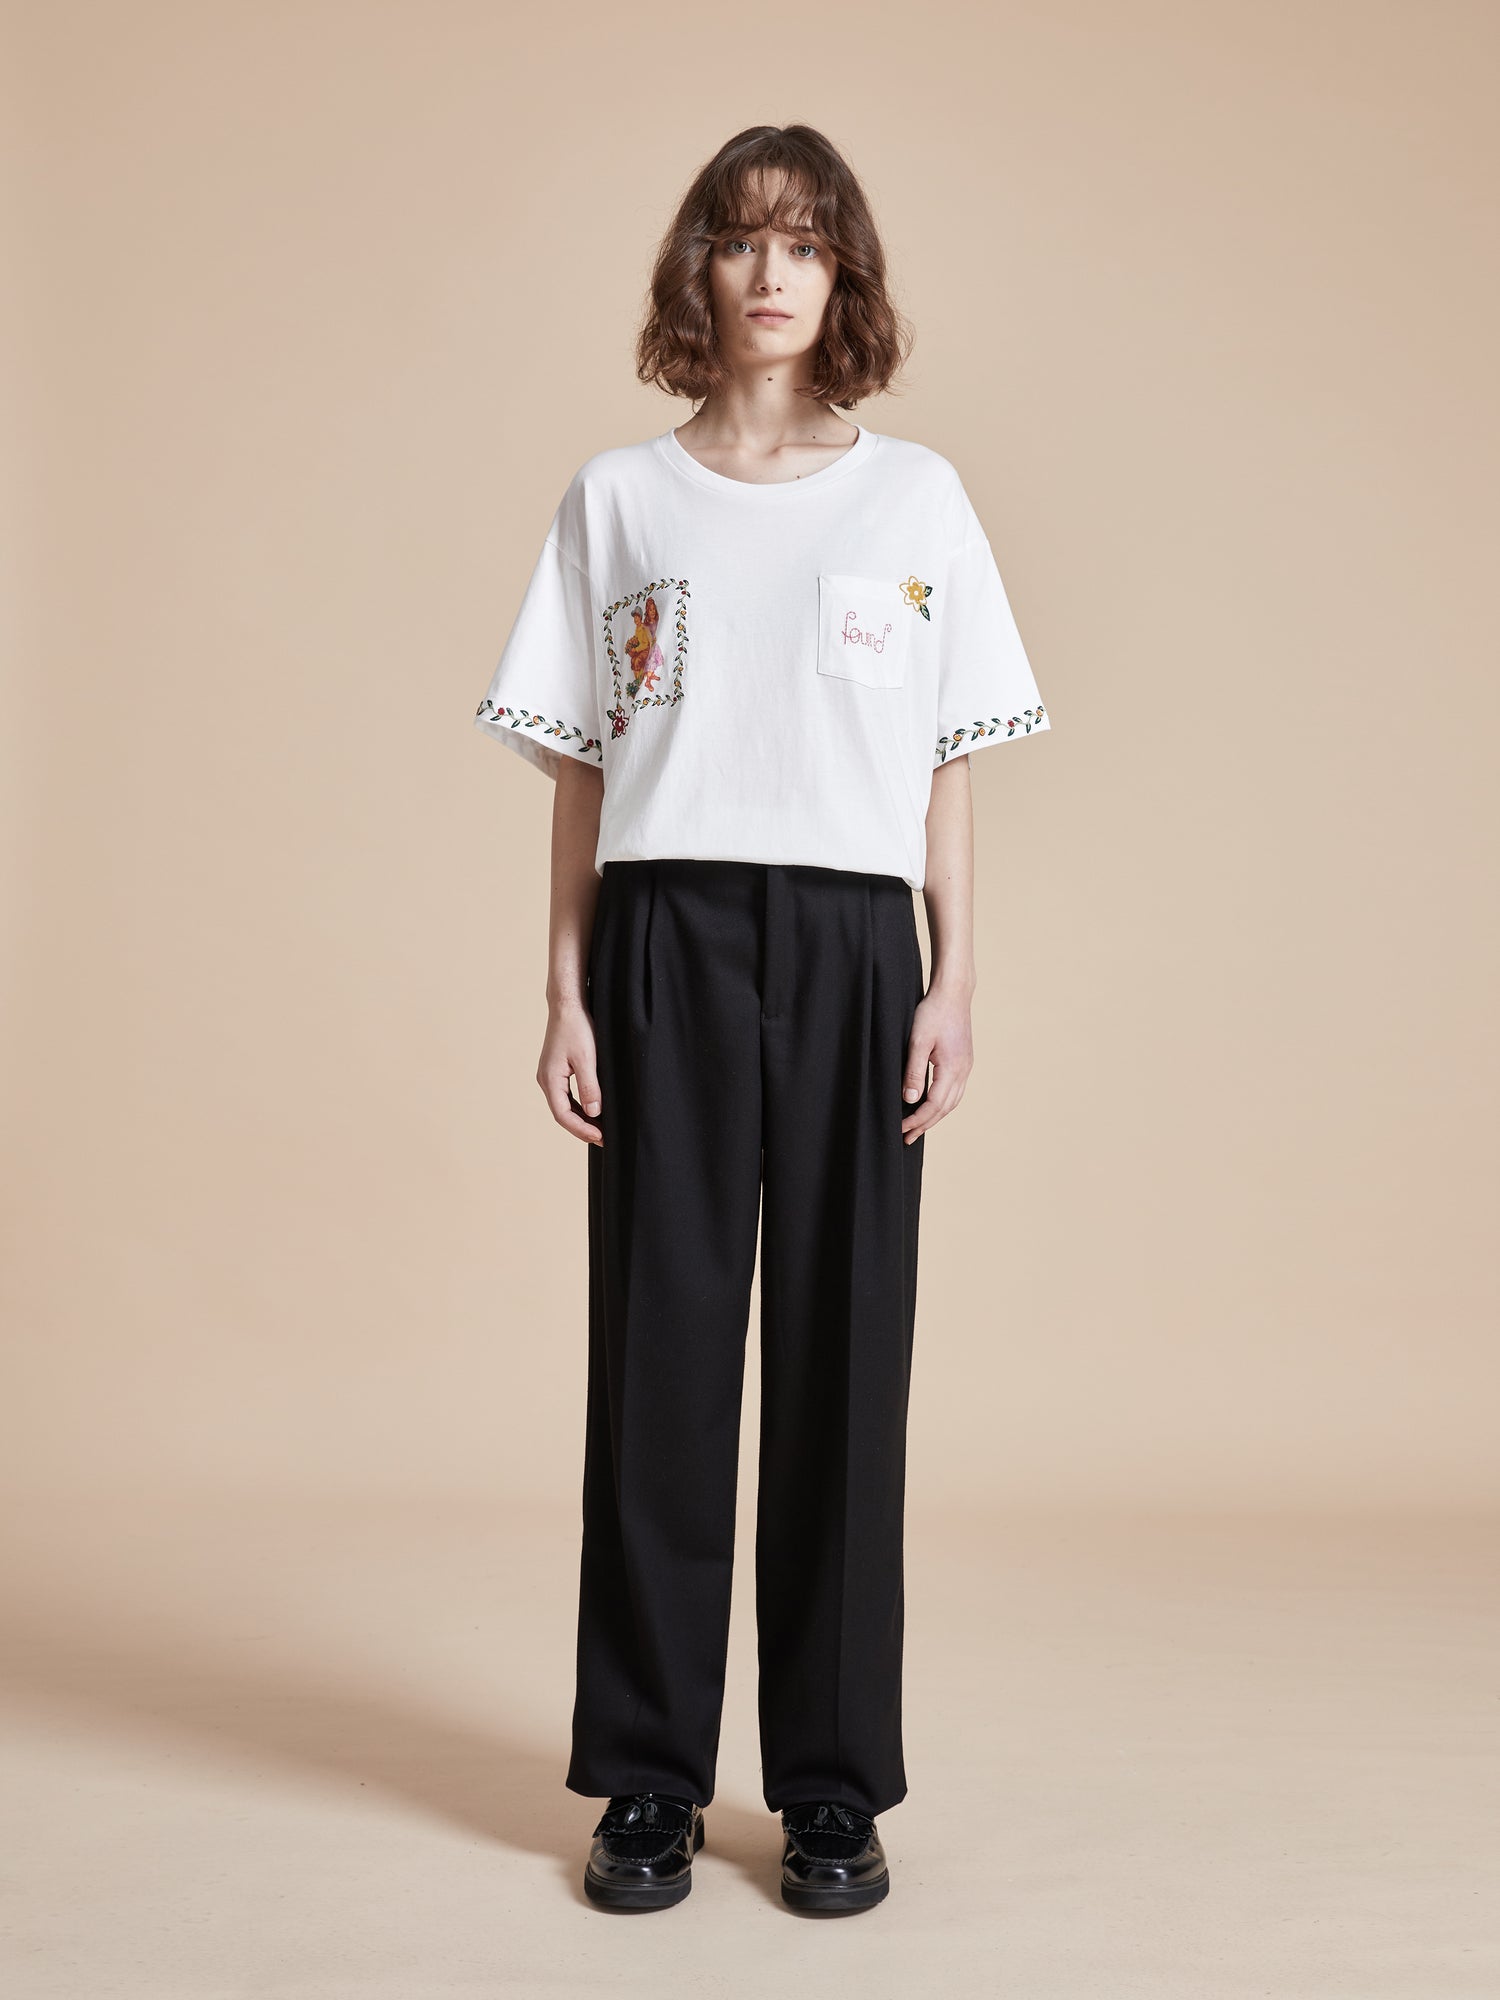 The model is wearing a white Flower Children Tee with floral Phulkari style embroideries and black trousers.